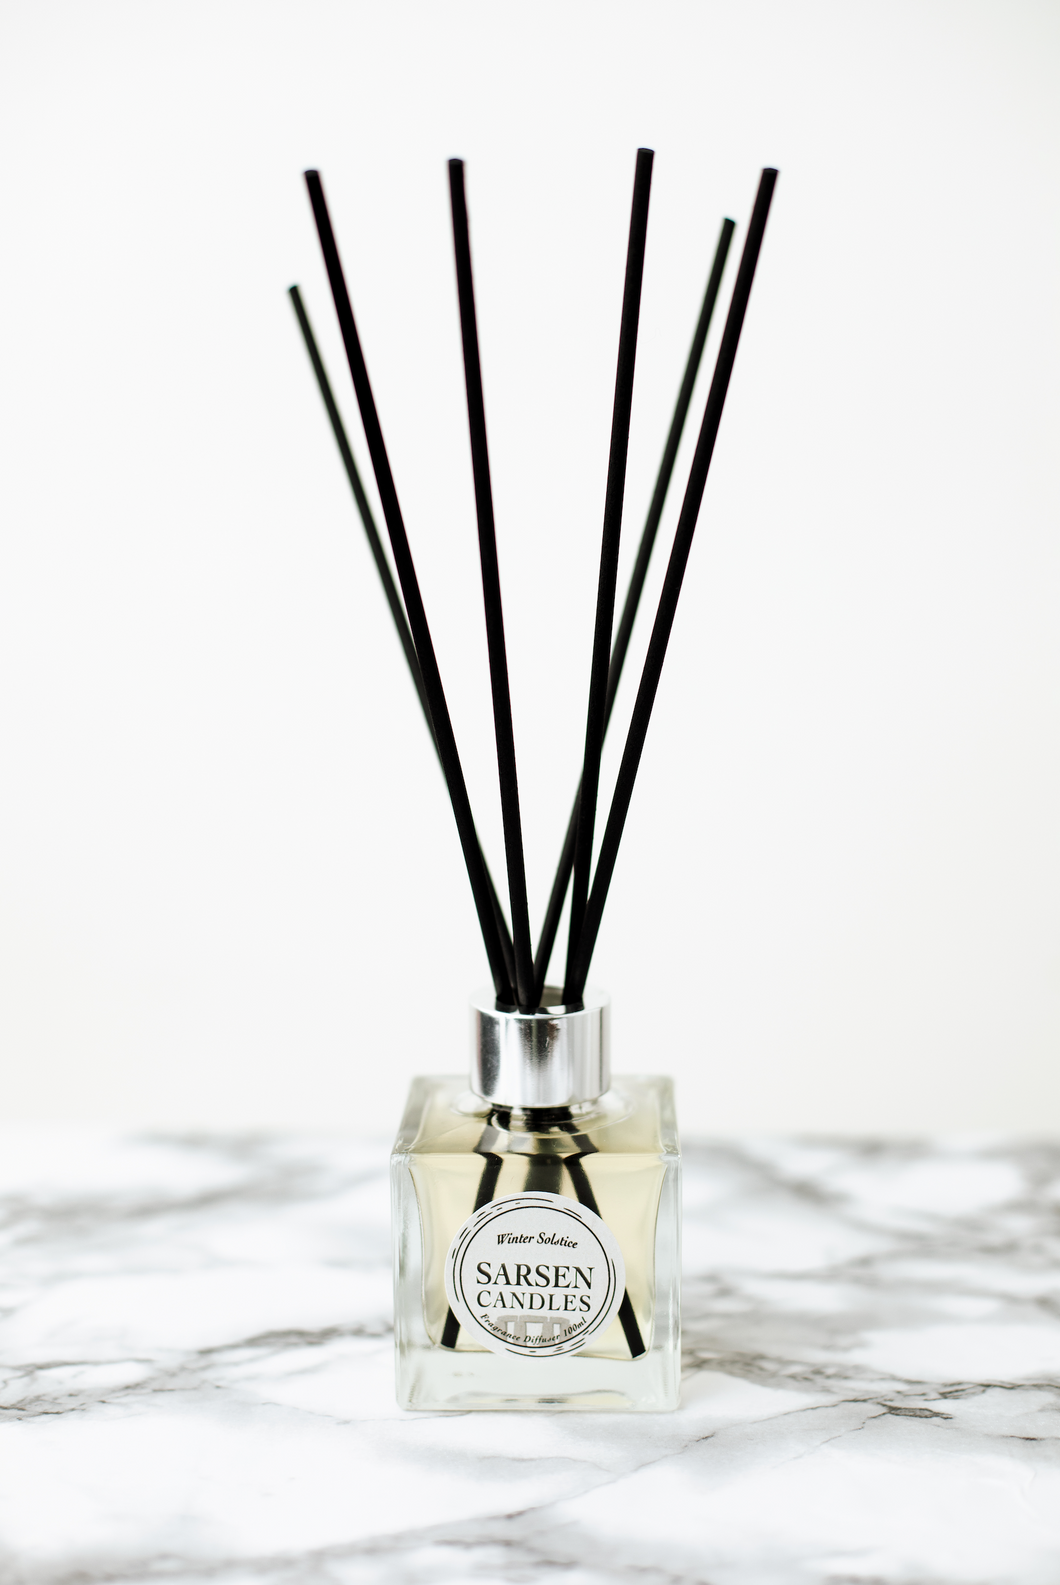 Winter Solstice Reed Diffusers